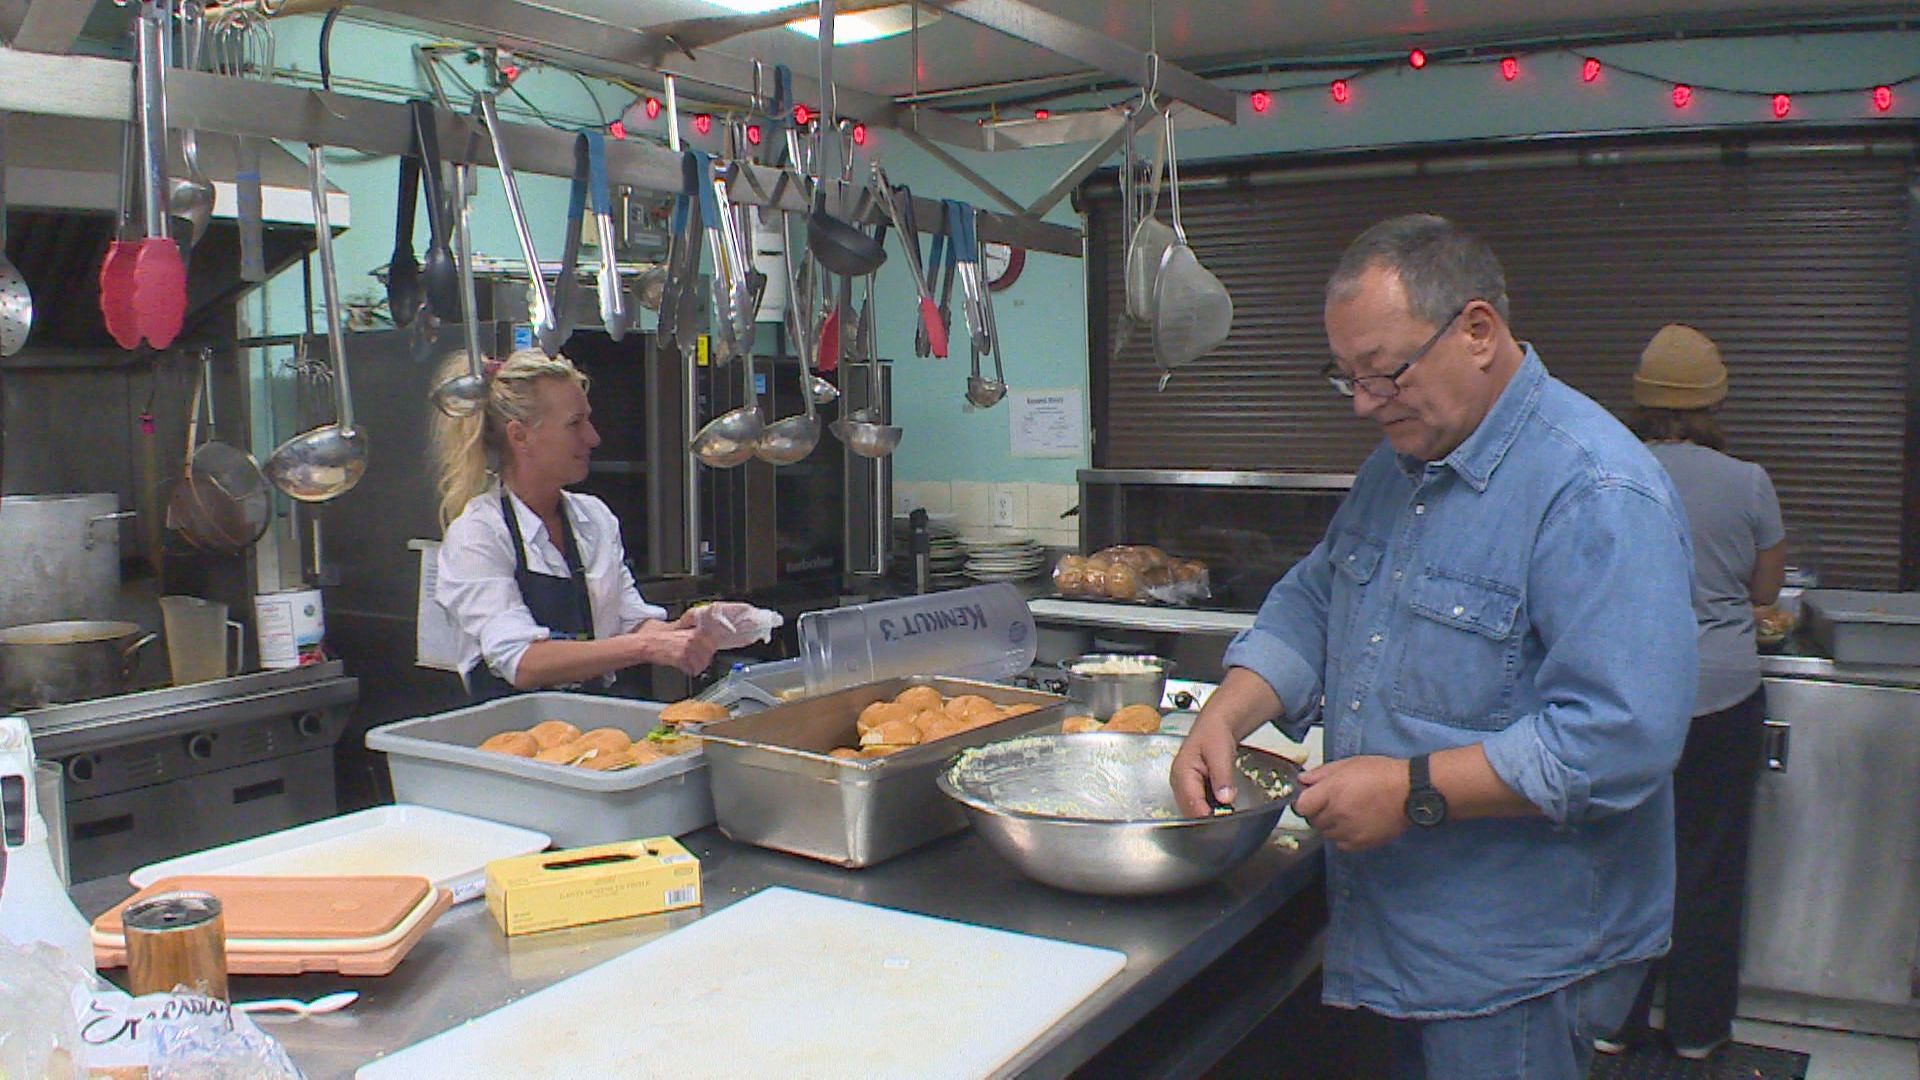 Kelowna’s Gospel Mission offering Thanksgiving meals to hundreds of people